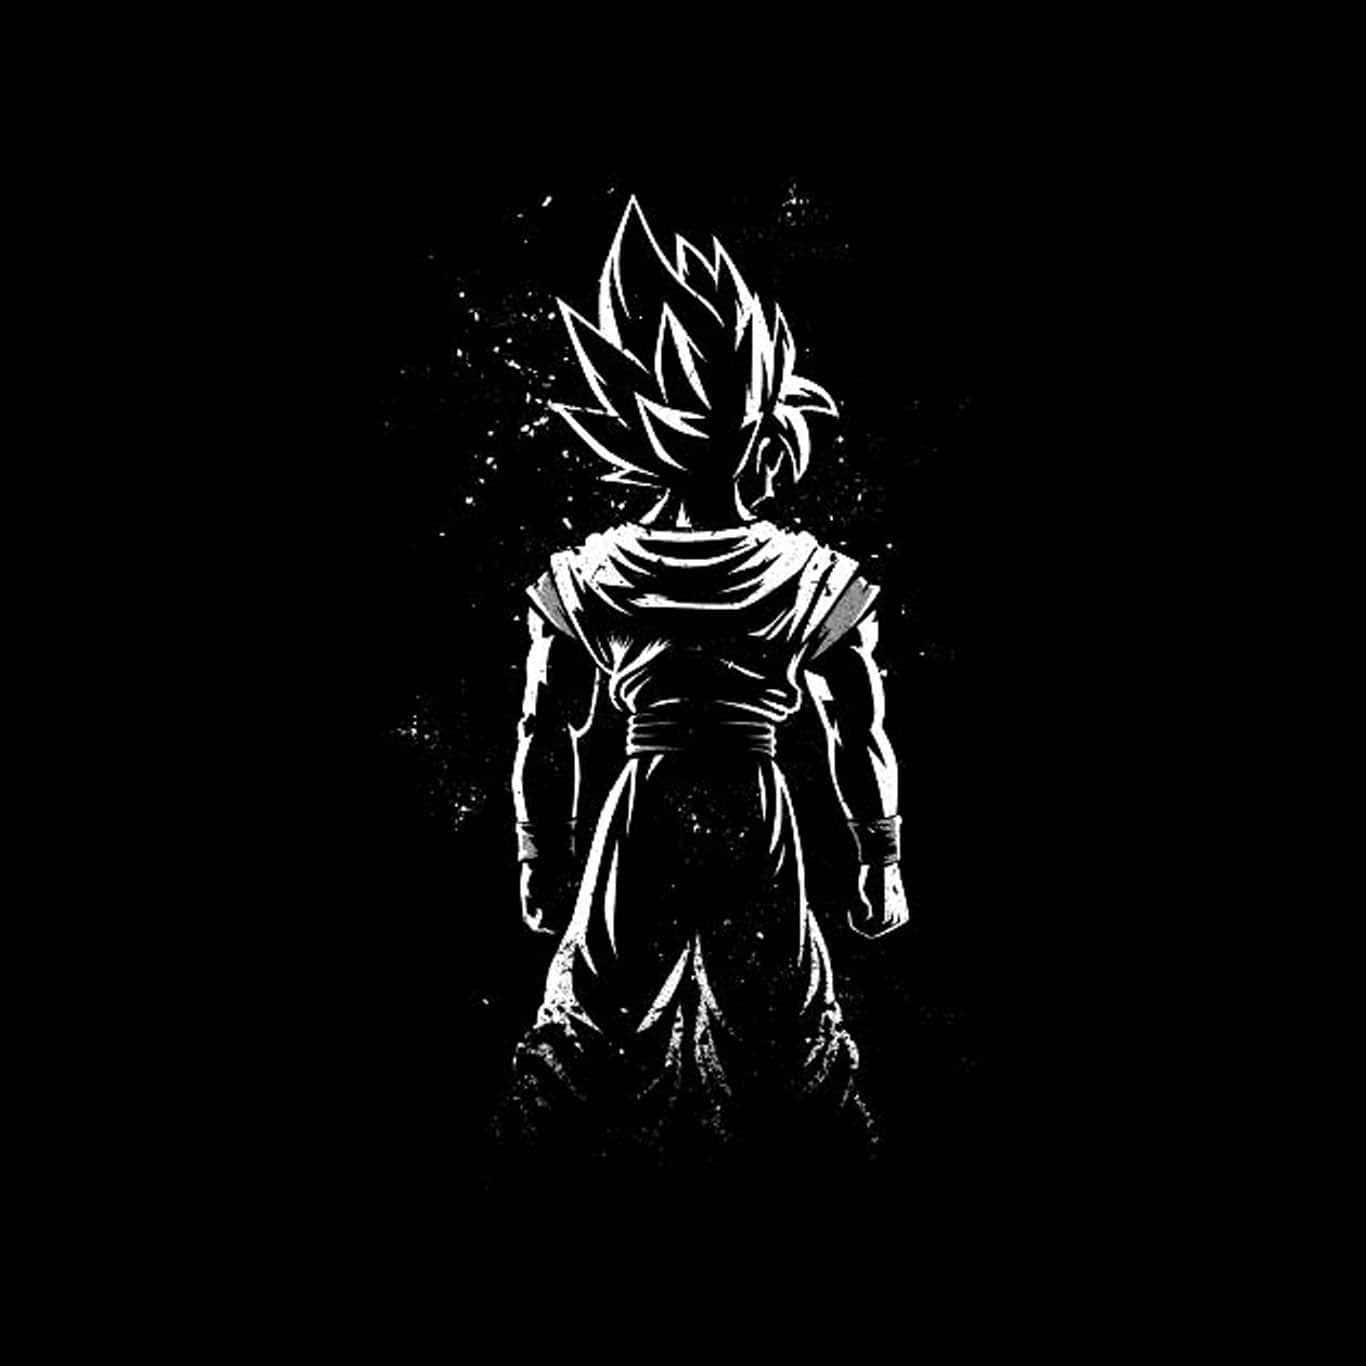 Goku Black, the powerful and fearsome antagonist of the Dragon Ball Super series